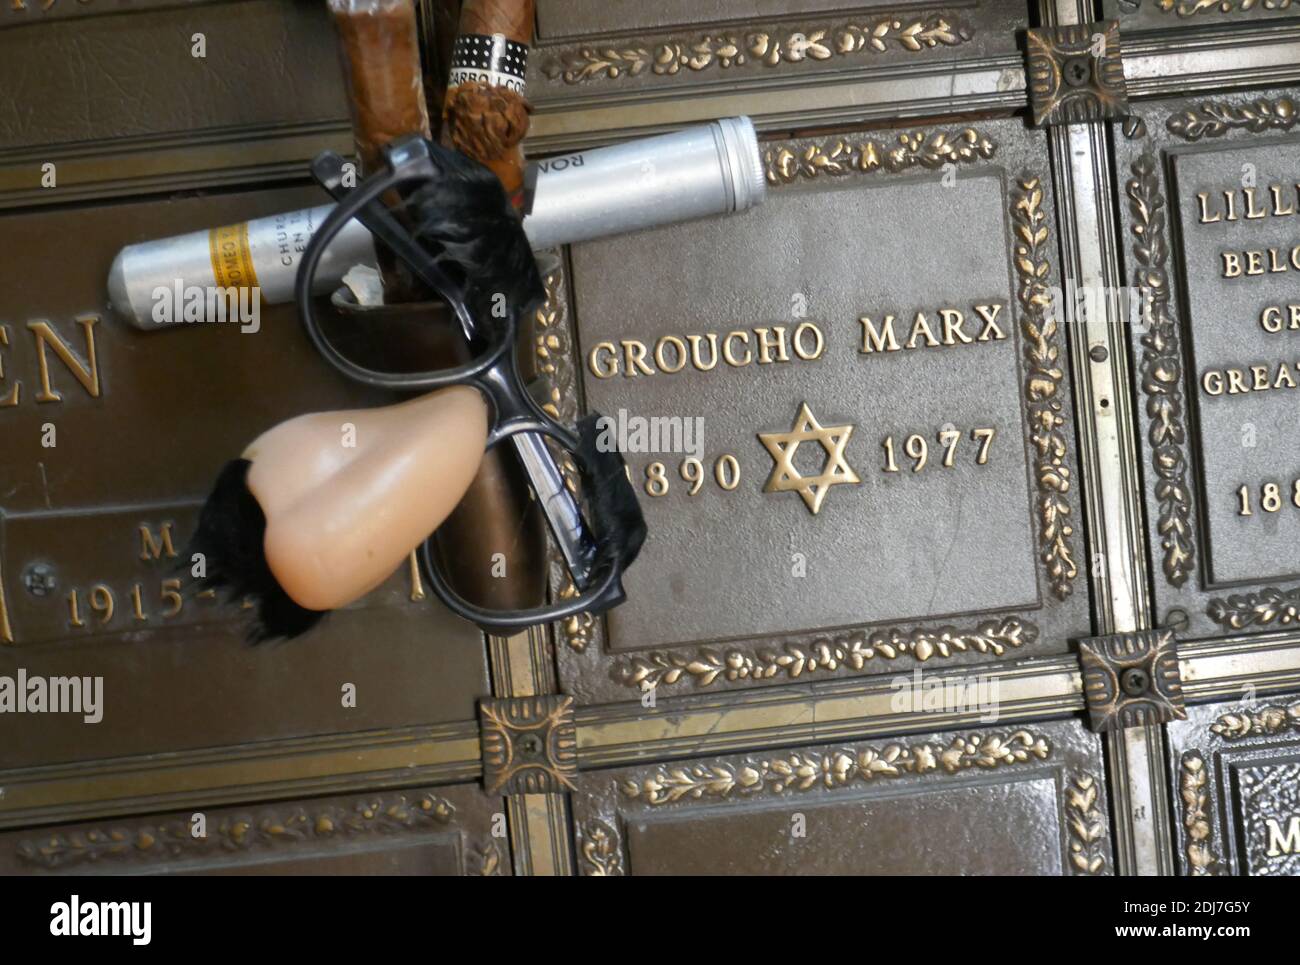 Mission Hills, California, USA 6th December 2020 A general view of atmosphere of comedian Groucho Marx's Grave in Court of the Tribes Mausoleum at Eden Memorial Park Cemetery on December 6, 2020 in Mission Hills, California, USA. Photo by Barry King/Alamy Stock Photo Stock Photo